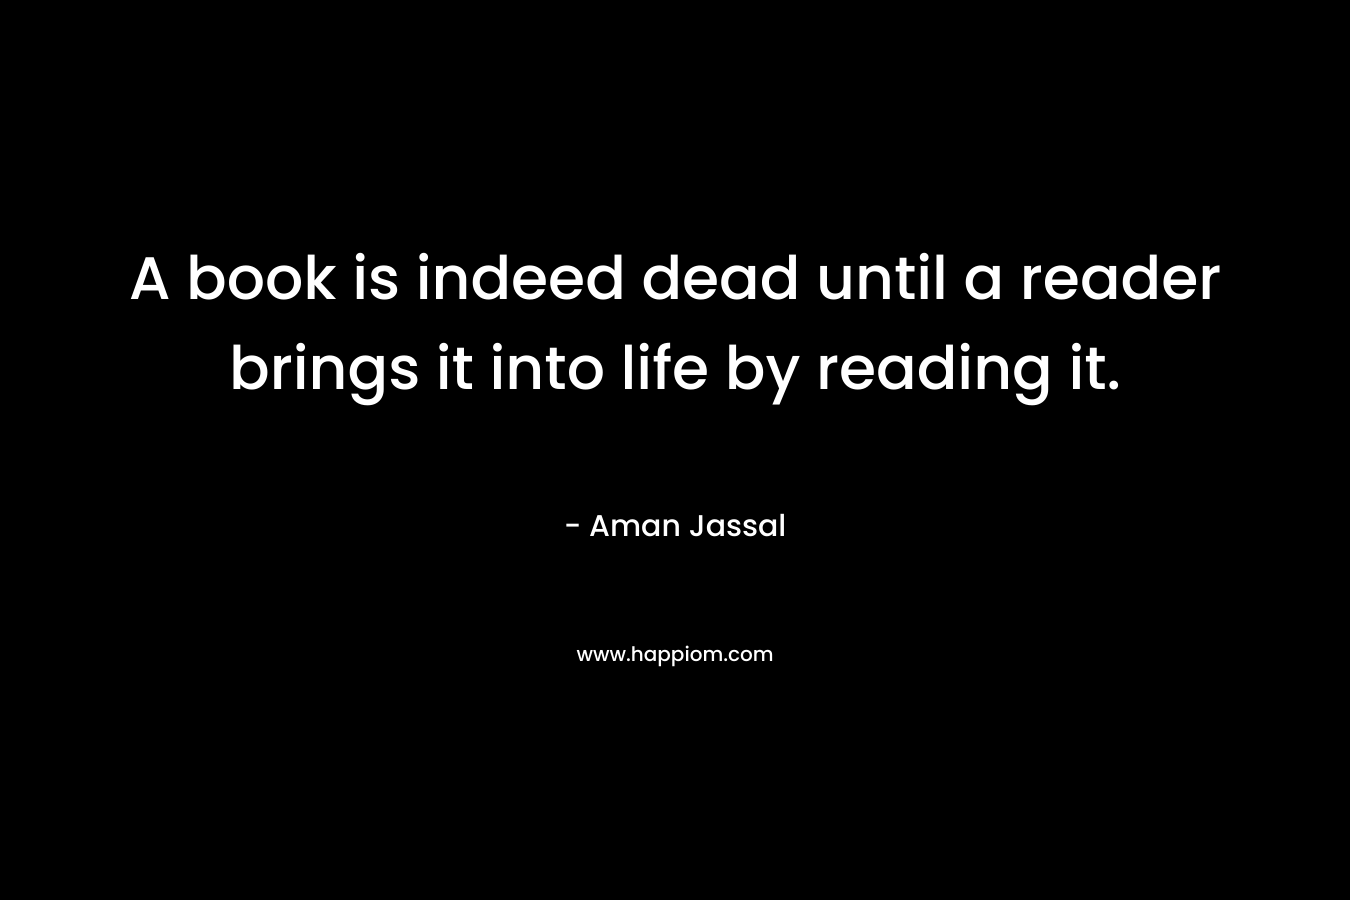 A book is indeed dead until a reader brings it into life by reading it.